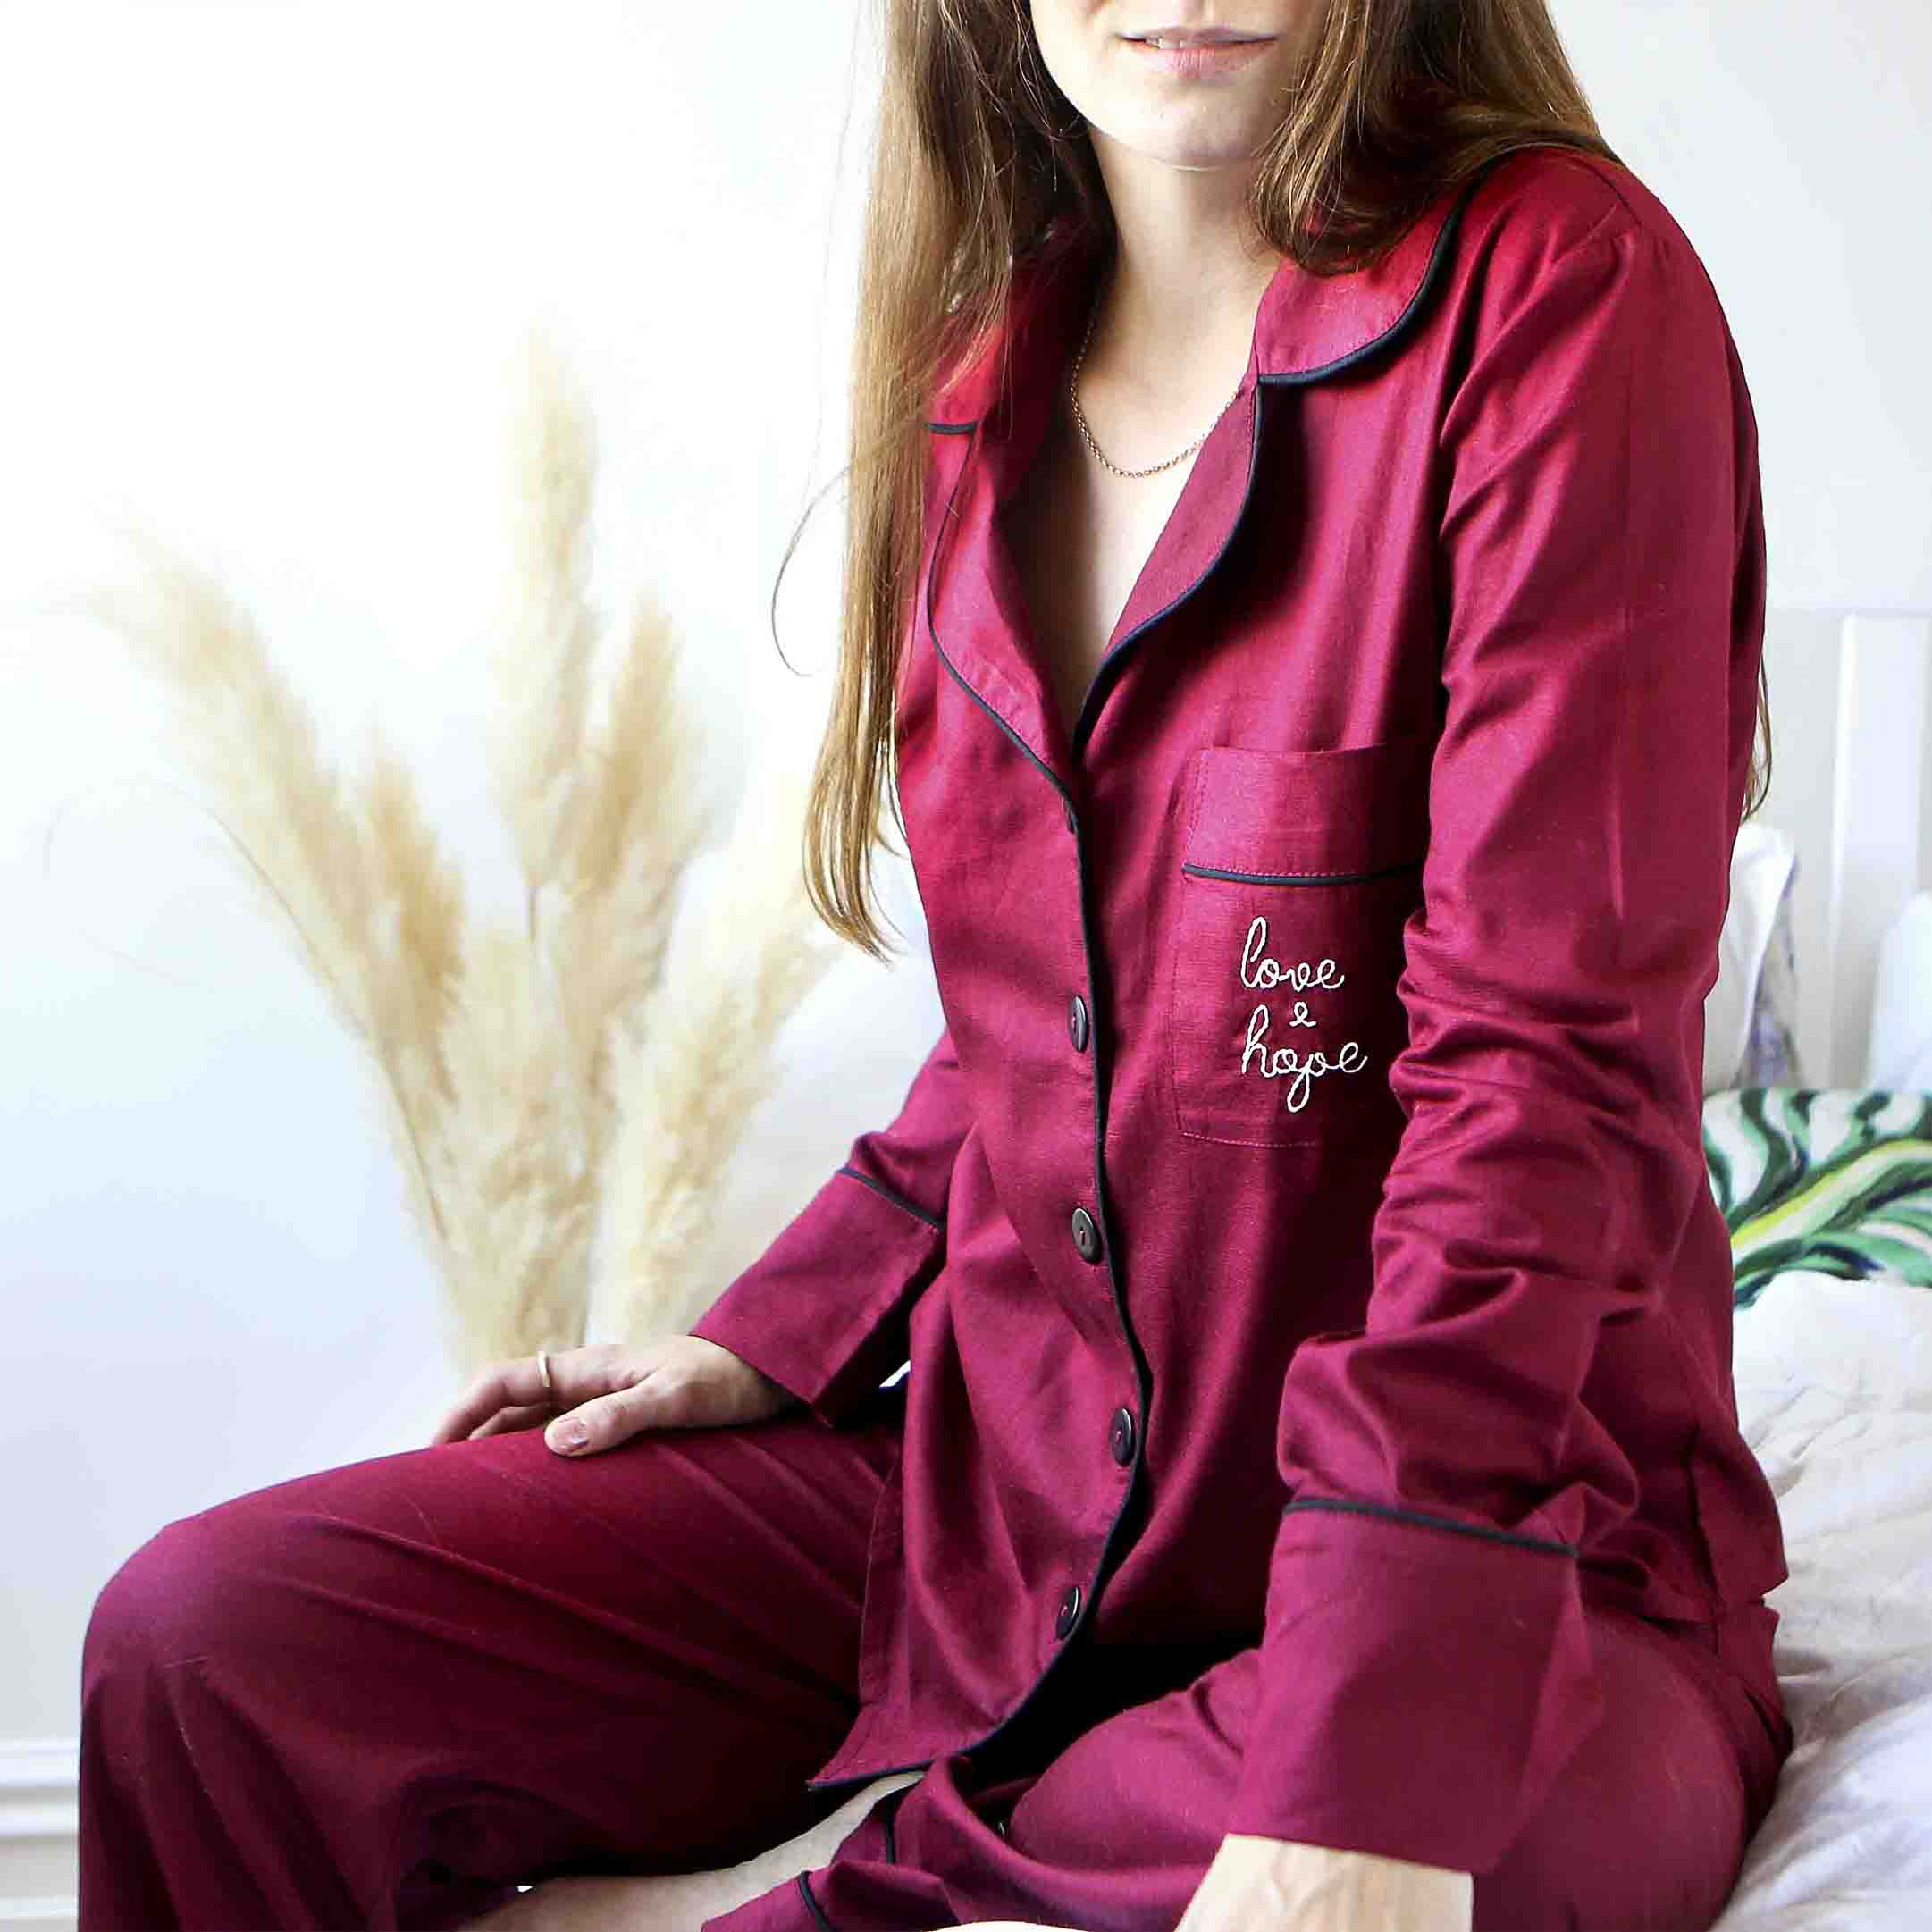 Organic Cotton Pyjamas by StephieAnn. Hand embroidered in Britain.